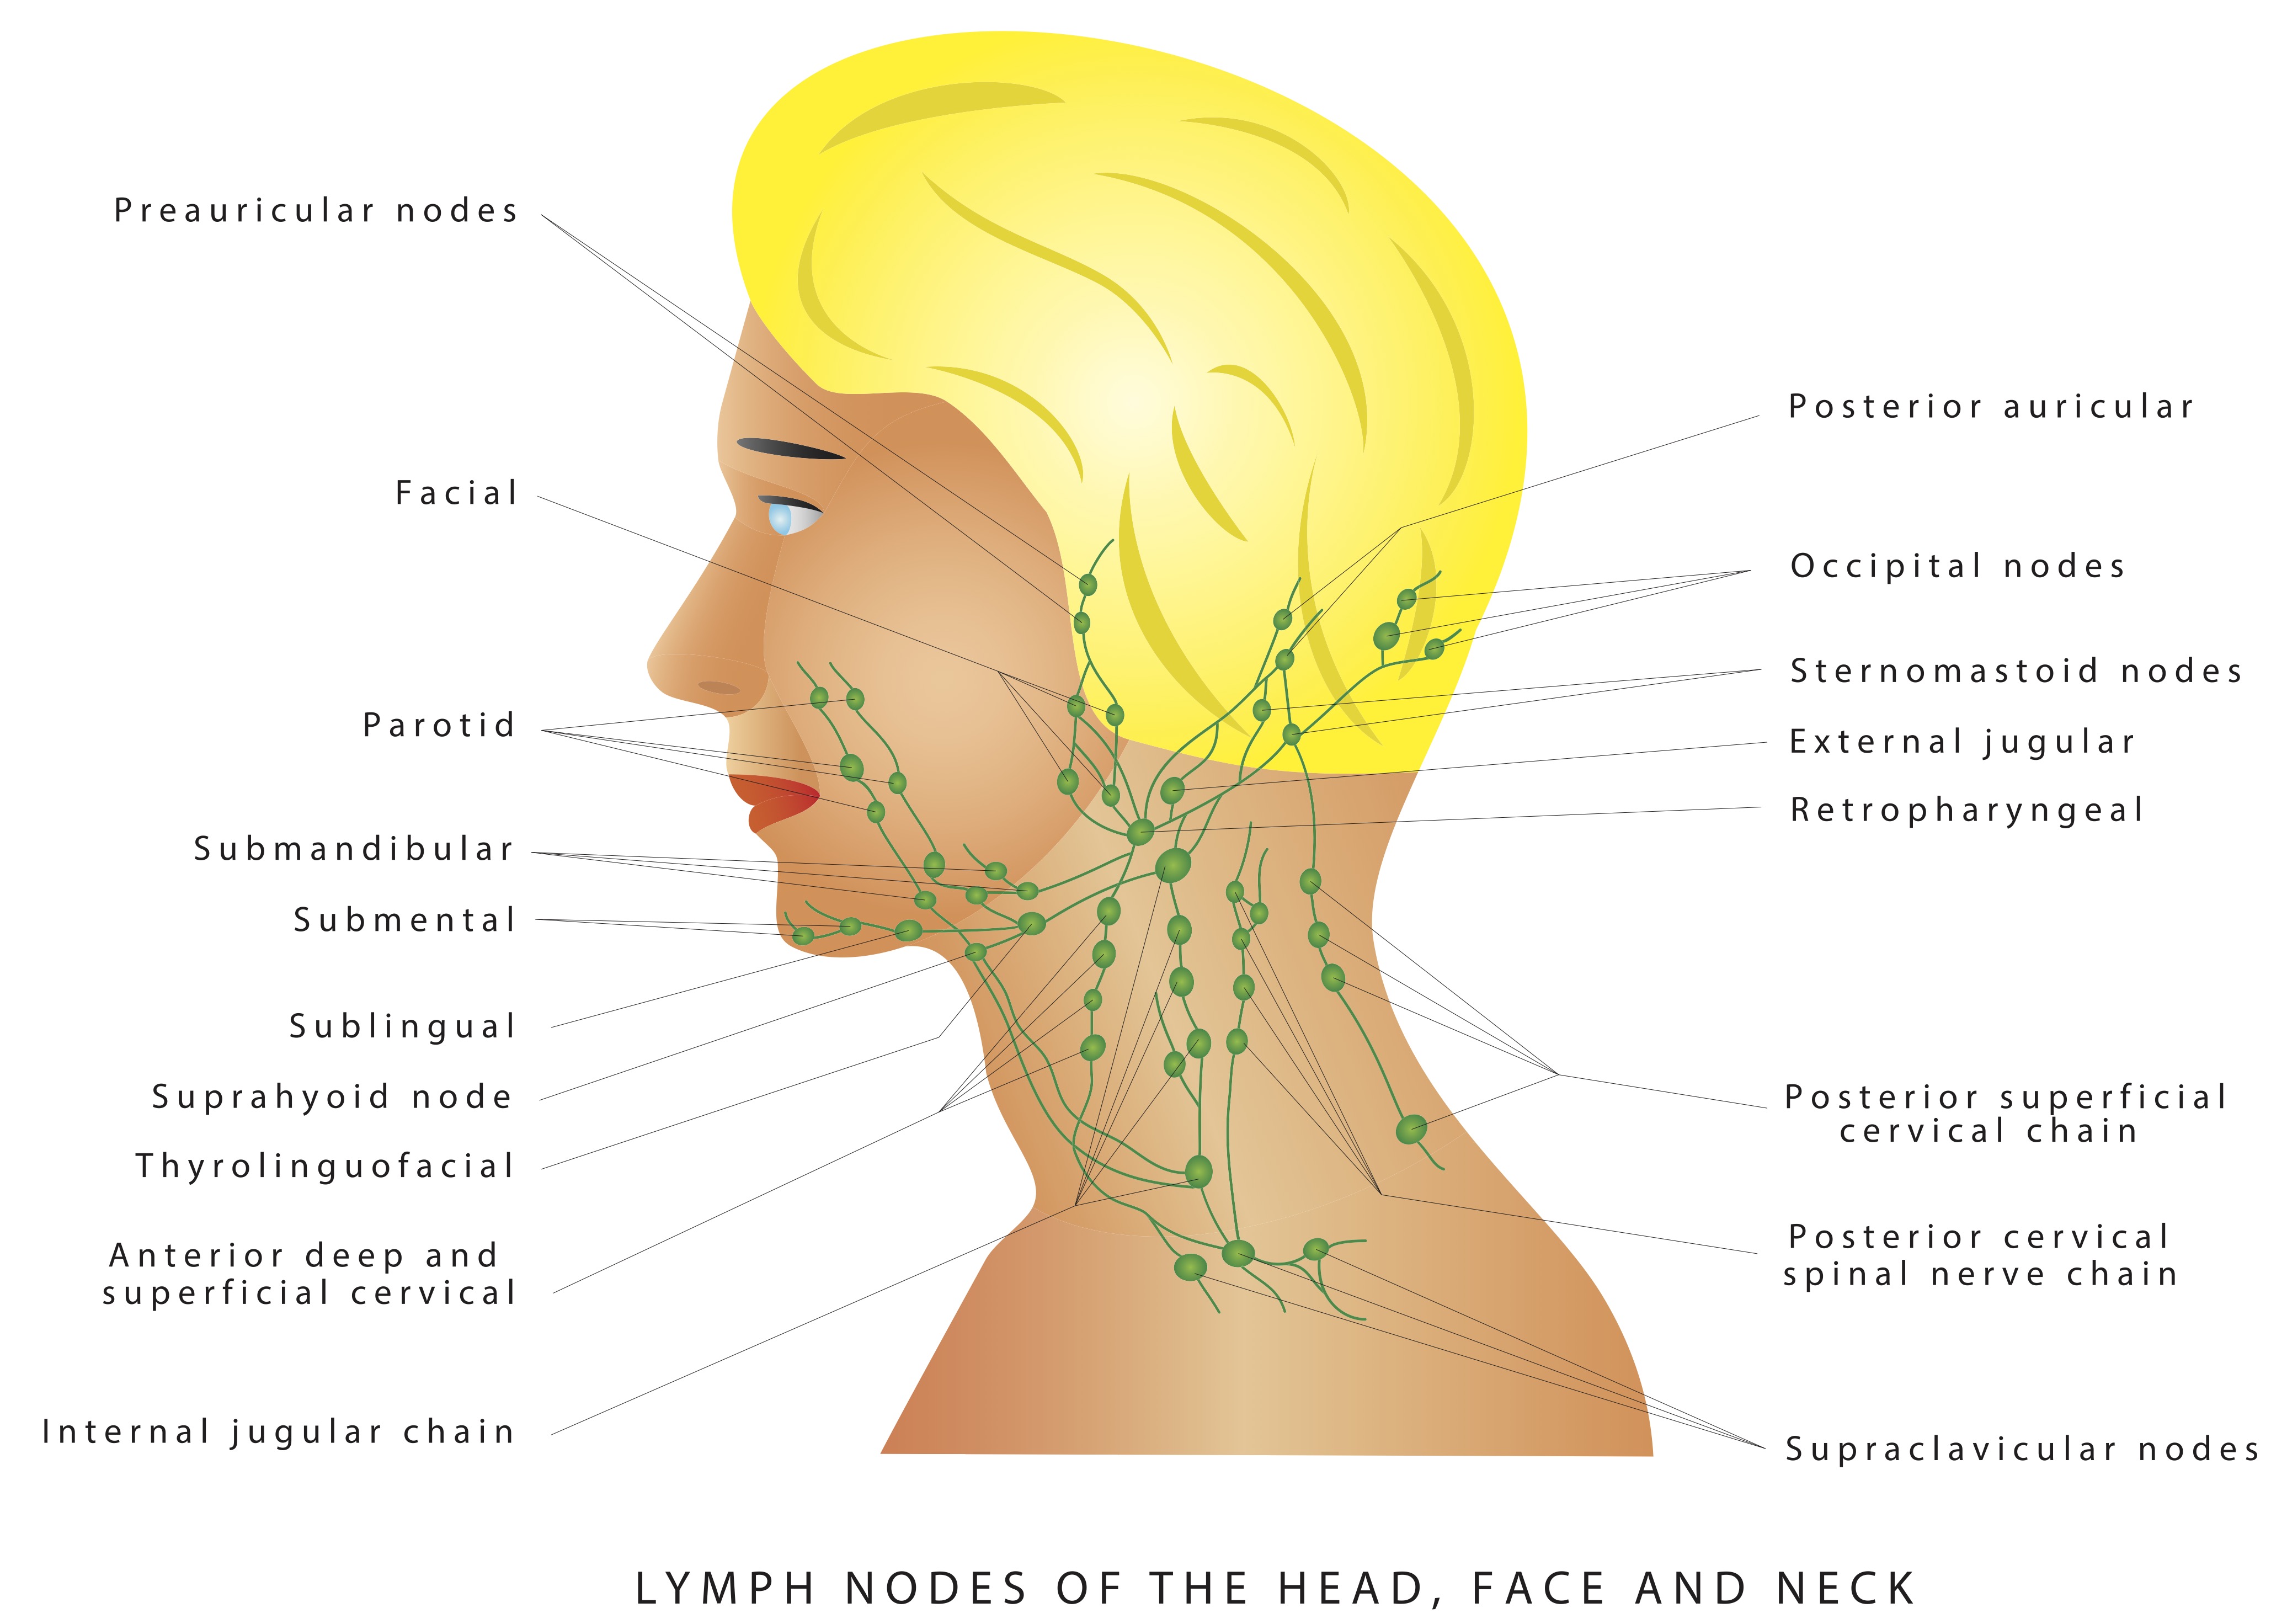 Gua Sha can create lymphatic drainage benefits through the lymph nodes in the neck, jawline, and the face for healthier looking skin and to slim the face.